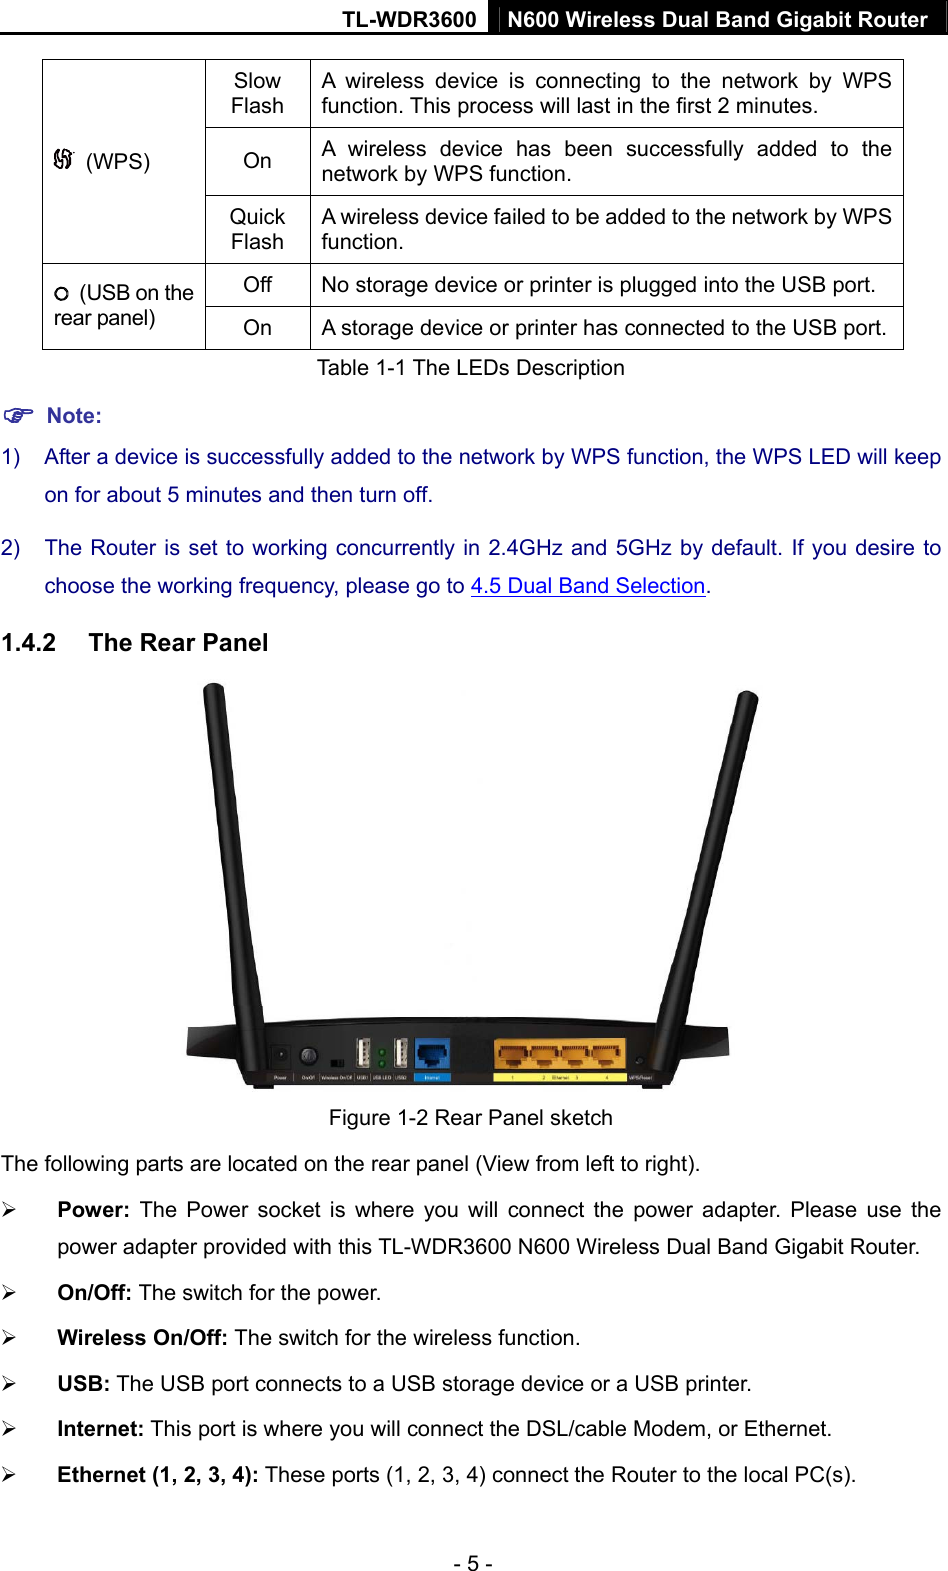 TL-WDR3600 N600 Wireless Dual Band Gigabit Router  - 5 - Slow Flash A wireless device is connecting to the network by WPS function. This process will last in the first 2 minutes. On  A wireless device has been successfully added to the network by WPS function.    (WPS) Quick Flash A wireless device failed to be added to the network by WPS function. Off  No storage device or printer is plugged into the USB port.  (USB on the rear panel)  On  A storage device or printer has connected to the USB port. Table 1-1 The LEDs Description ) Note: 1)  After a device is successfully added to the network by WPS function, the WPS LED will keep on for about 5 minutes and then turn off.   2)  The Router is set to working concurrently in 2.4GHz and 5GHz by default. If you desire to choose the working frequency, please go to 4.5 Dual Band Selection. 1.4.2  The Rear Panel  Figure 1-2 Rear Panel sketch The following parts are located on the rear panel (View from left to right). ¾ Power:  The Power socket is where you will connect the power adapter. Please use the power adapter provided with this TL-WDR3600 N600 Wireless Dual Band Gigabit Router. ¾ On/Off: The switch for the power. ¾ Wireless On/Off: The switch for the wireless function. ¾ USB: The USB port connects to a USB storage device or a USB printer. ¾ Internet: This port is where you will connect the DSL/cable Modem, or Ethernet. ¾ Ethernet (1, 2, 3, 4): These ports (1, 2, 3, 4) connect the Router to the local PC(s). 